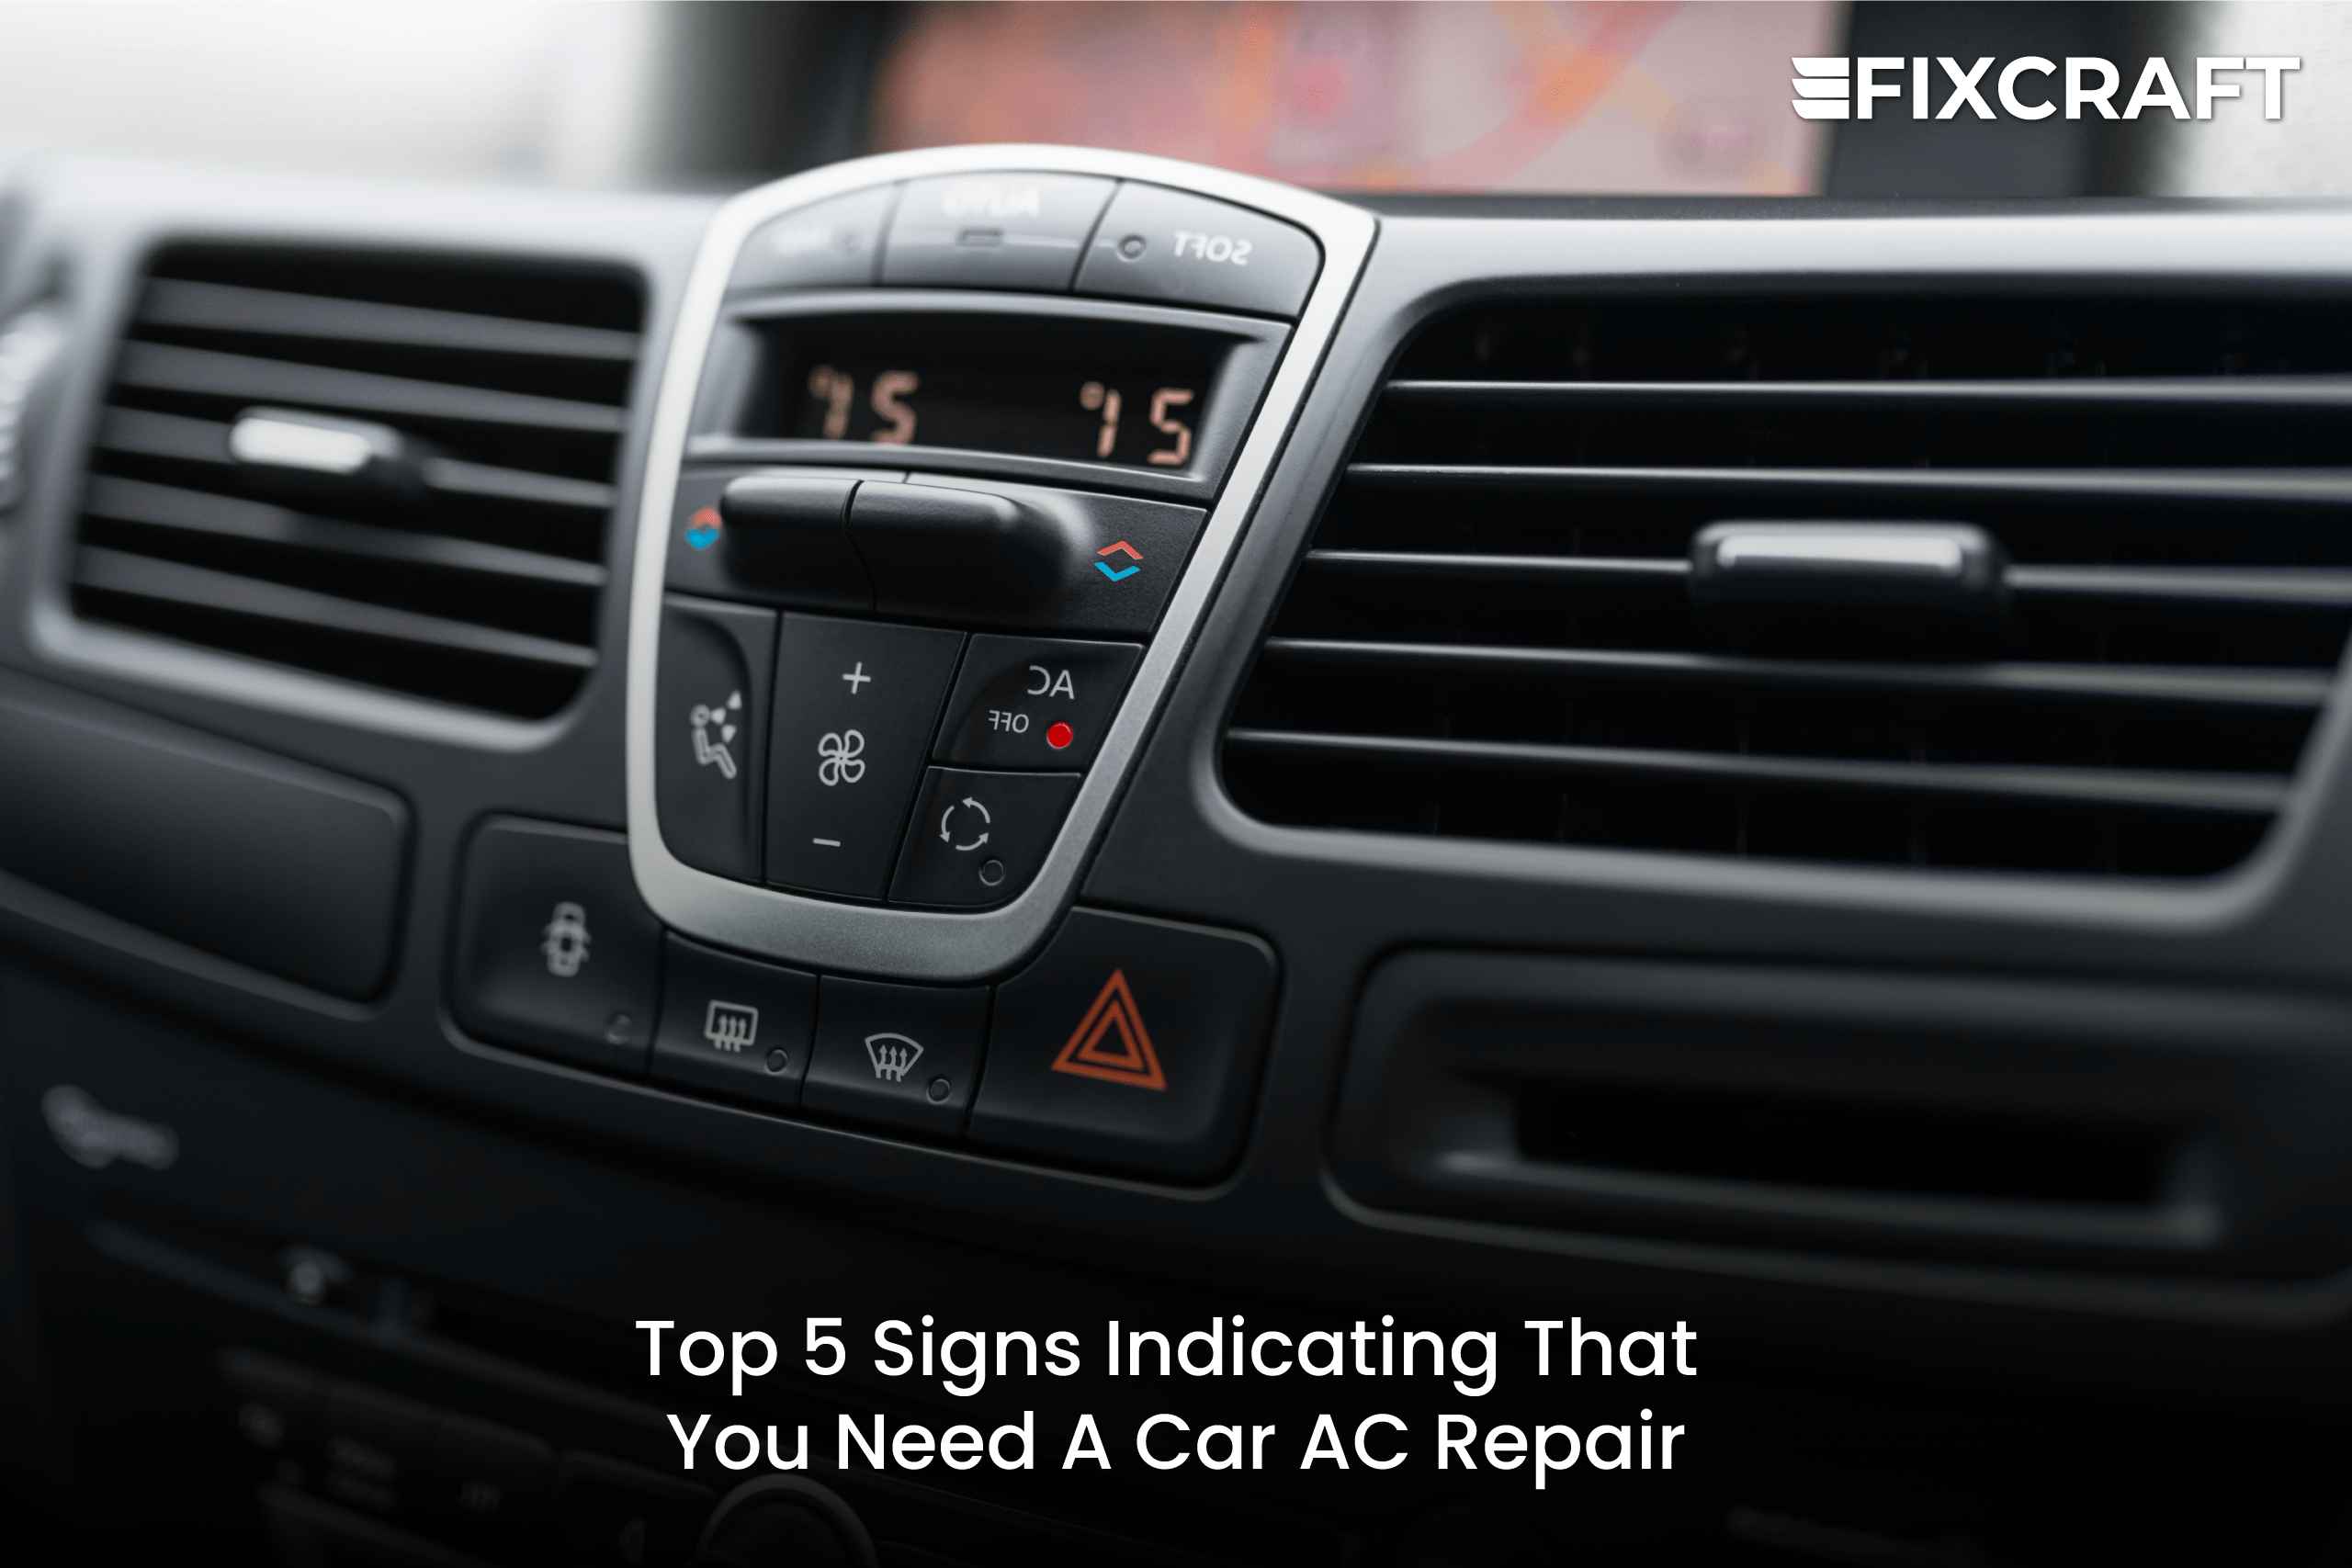 Signs indicating that your AC needs repair